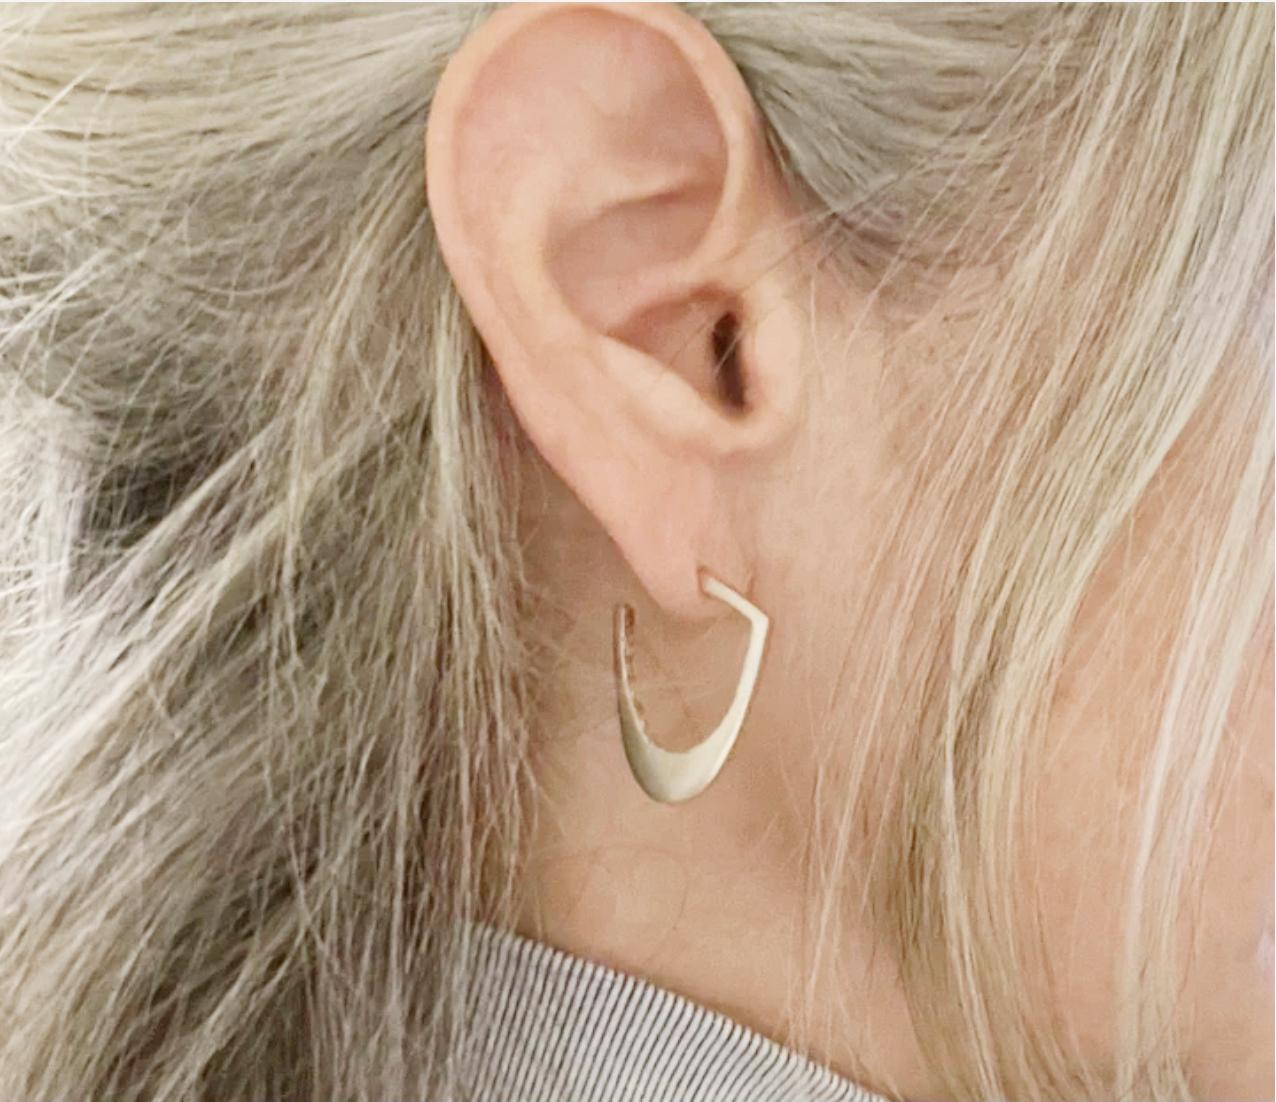 If you are the person that wears earrings every day, our Sterling Silver Hoops are just what you need. Their sensuous soft shapes have a wonderful texture on the inside creating a juxtaposition that adds interest and visibility in a casual yet